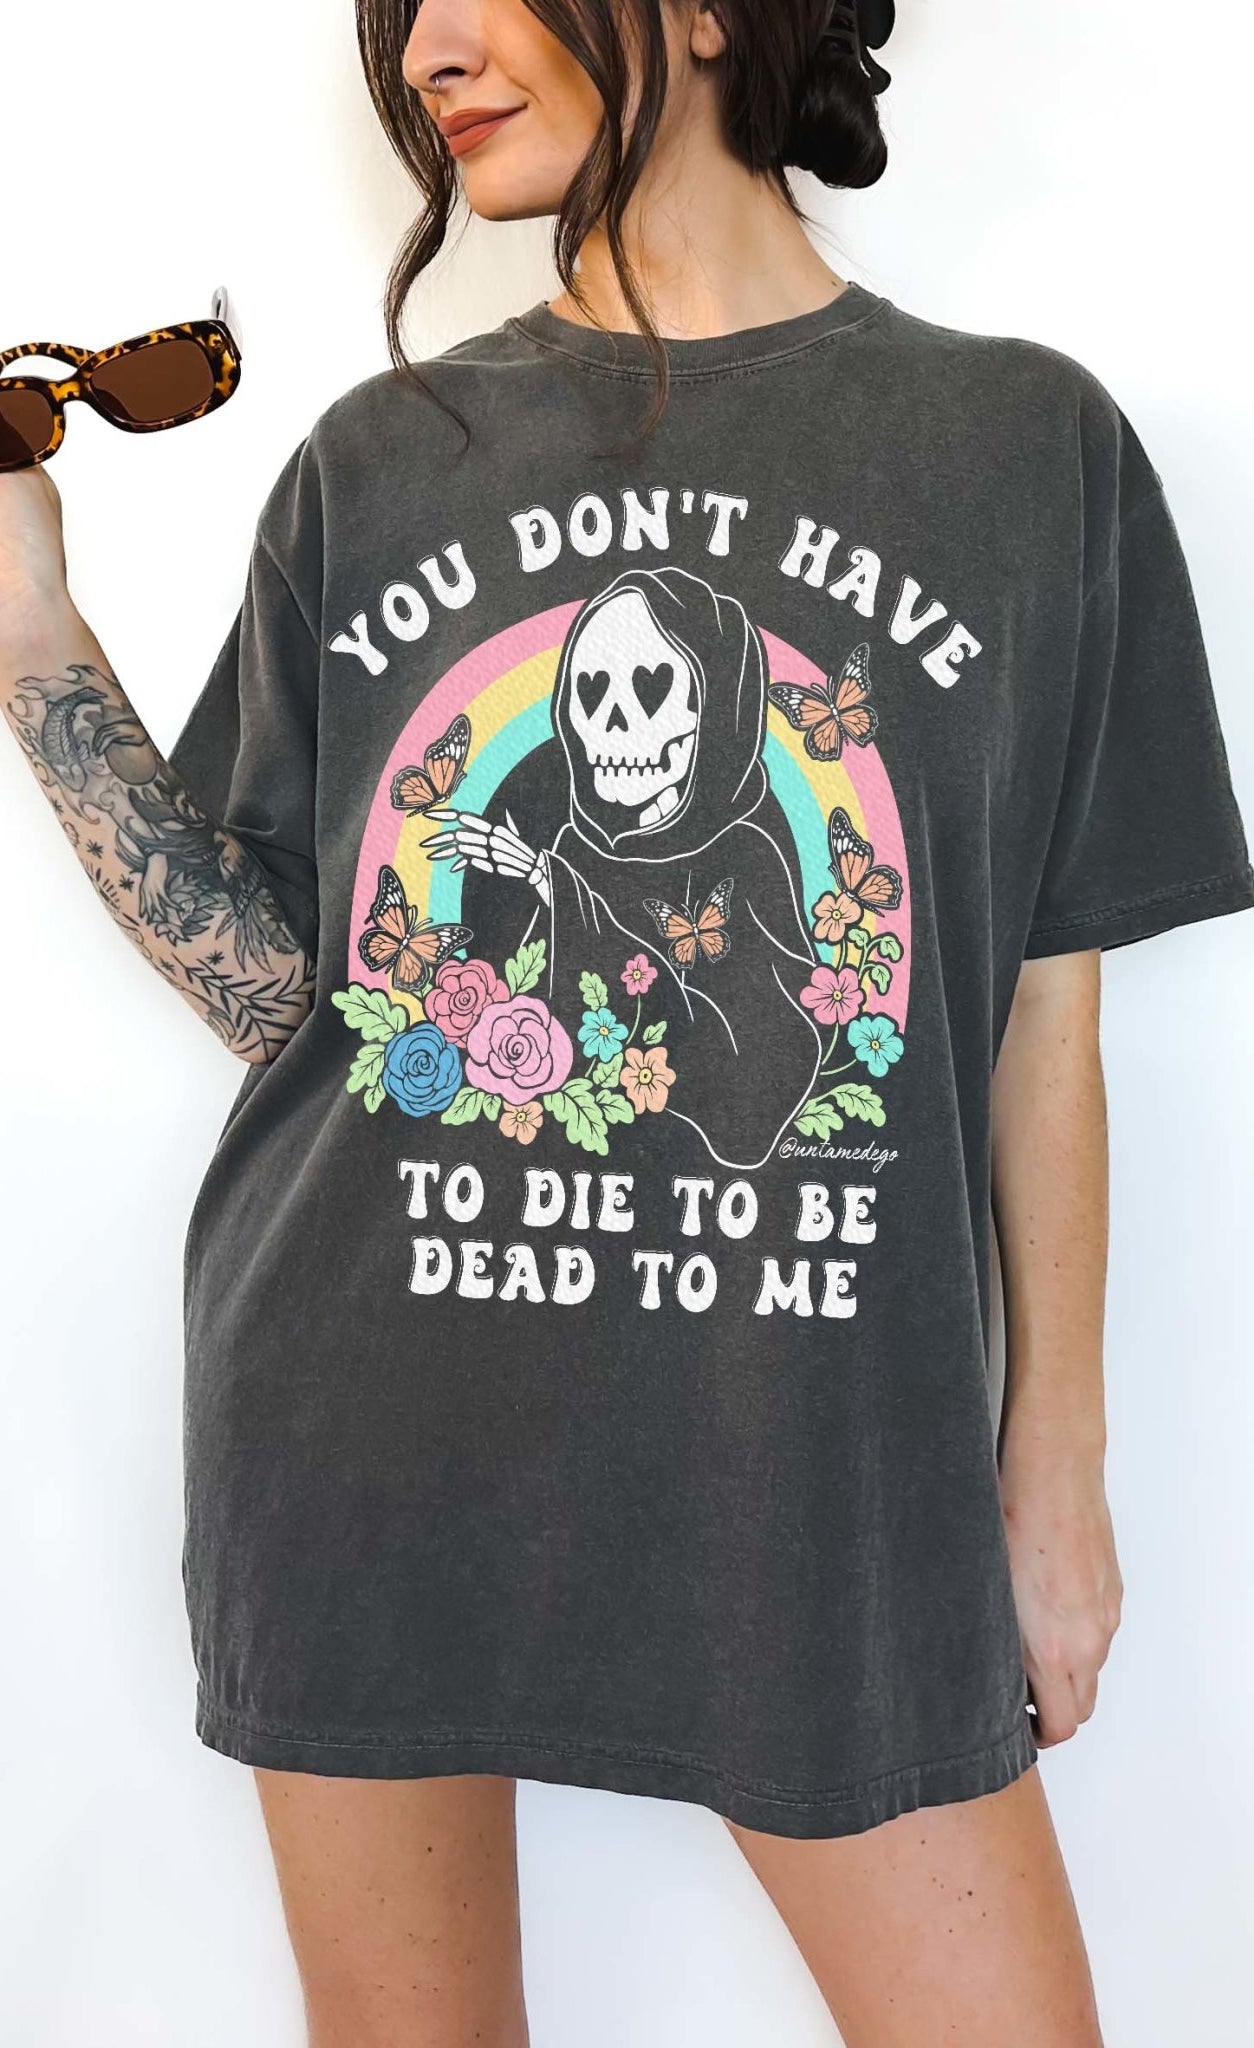 You Don't Have To Die To Be Dead To Me Unisex Tee - UntamedEgo LLC.